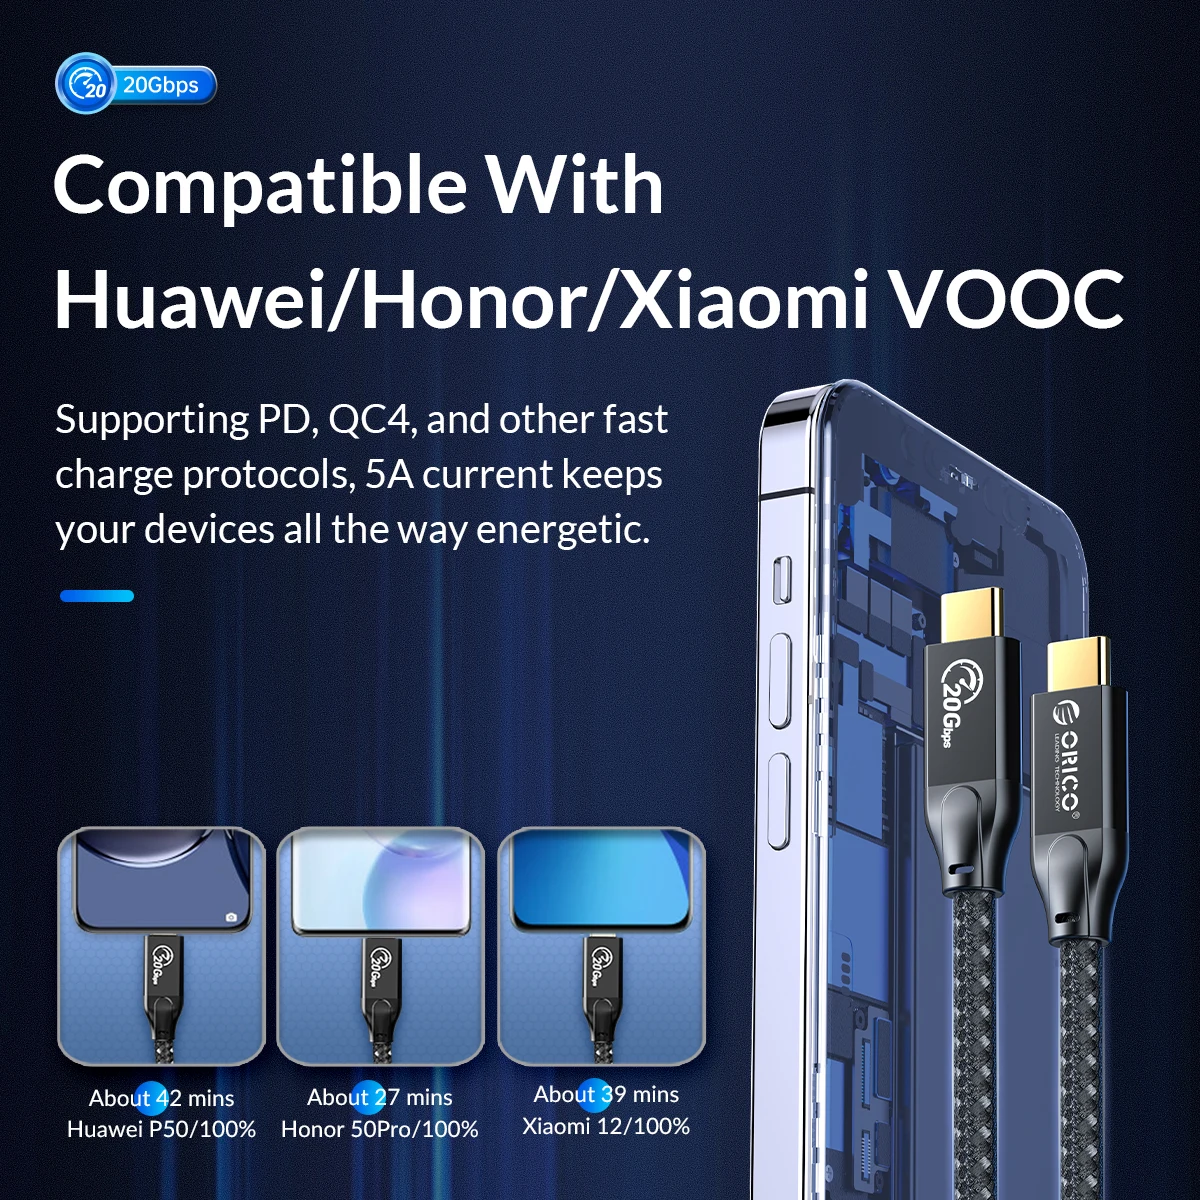 USB to HDMI cable for Smartphone and Tablet - Orico